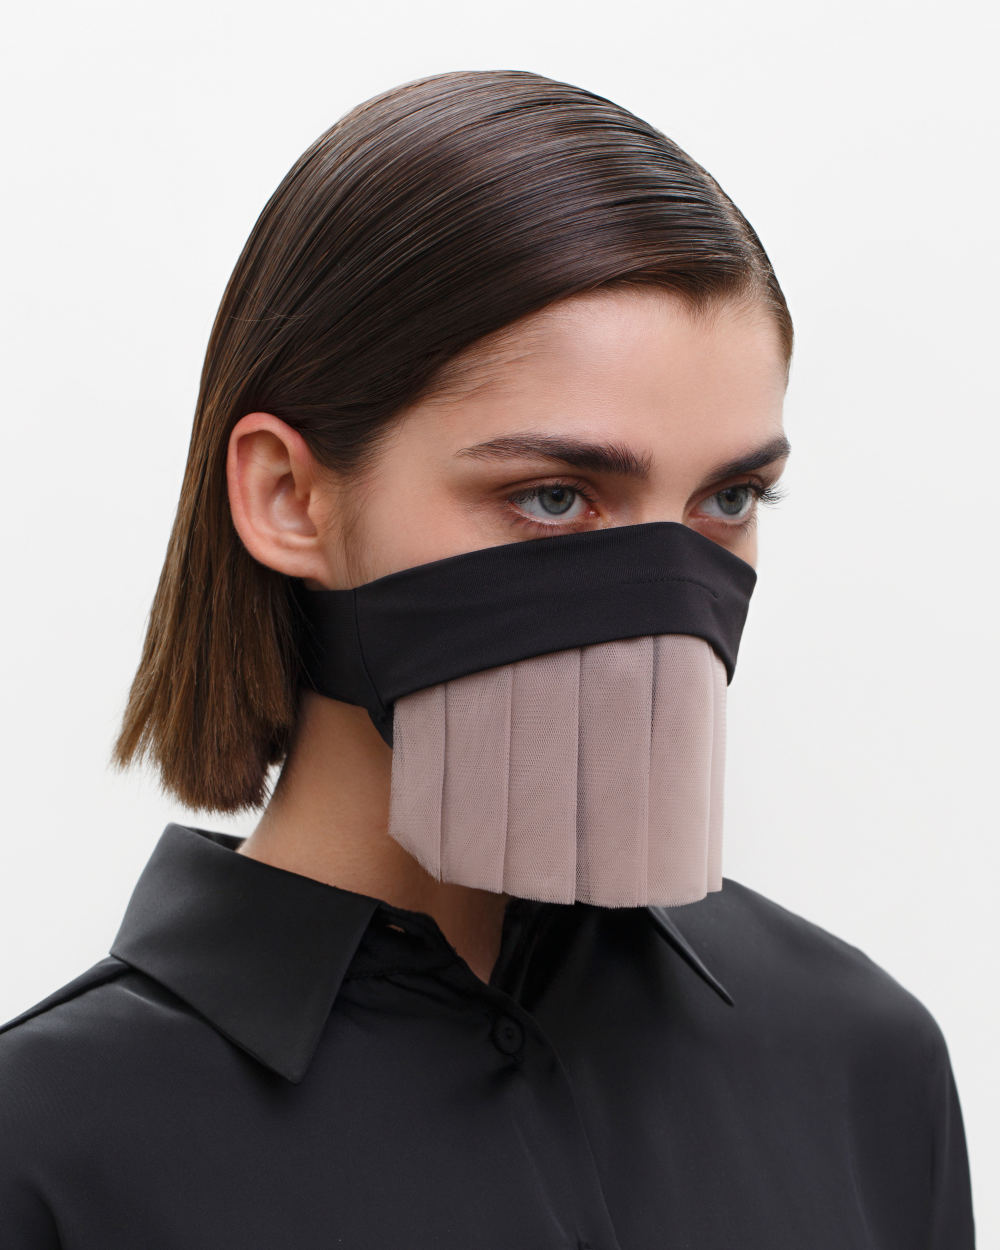 Couture Face Covering with a Pleated Veil, Ear Strap-Free. The FAKOUT. Black &amp; Seashell